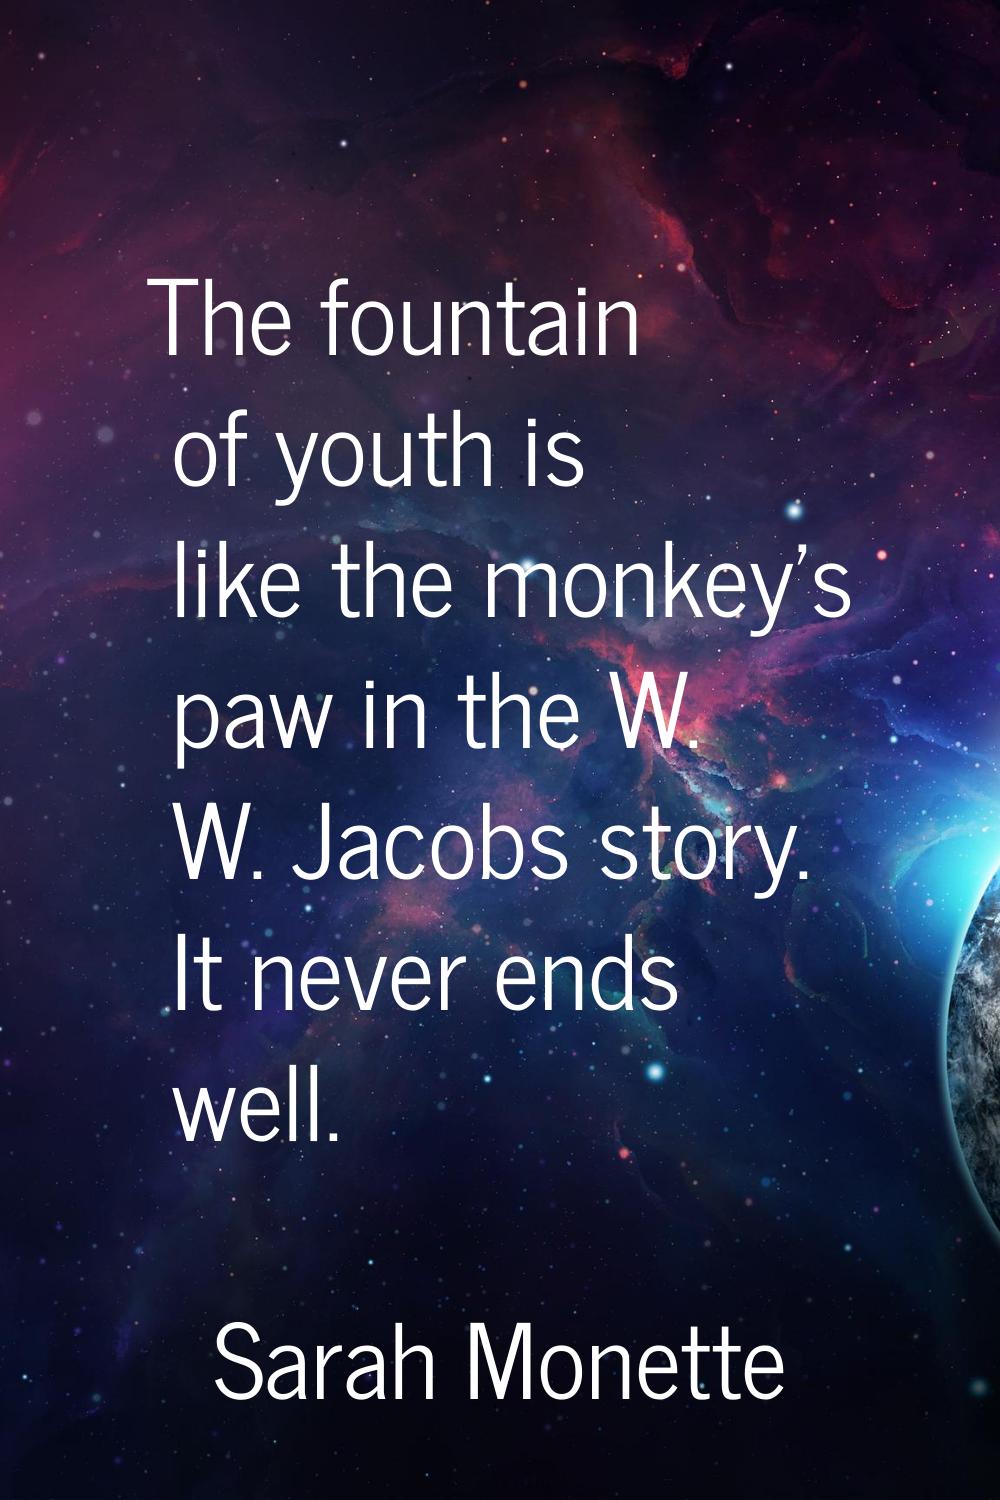 The fountain of youth is like the monkey's paw in the W. W. Jacobs story. It never ends well.